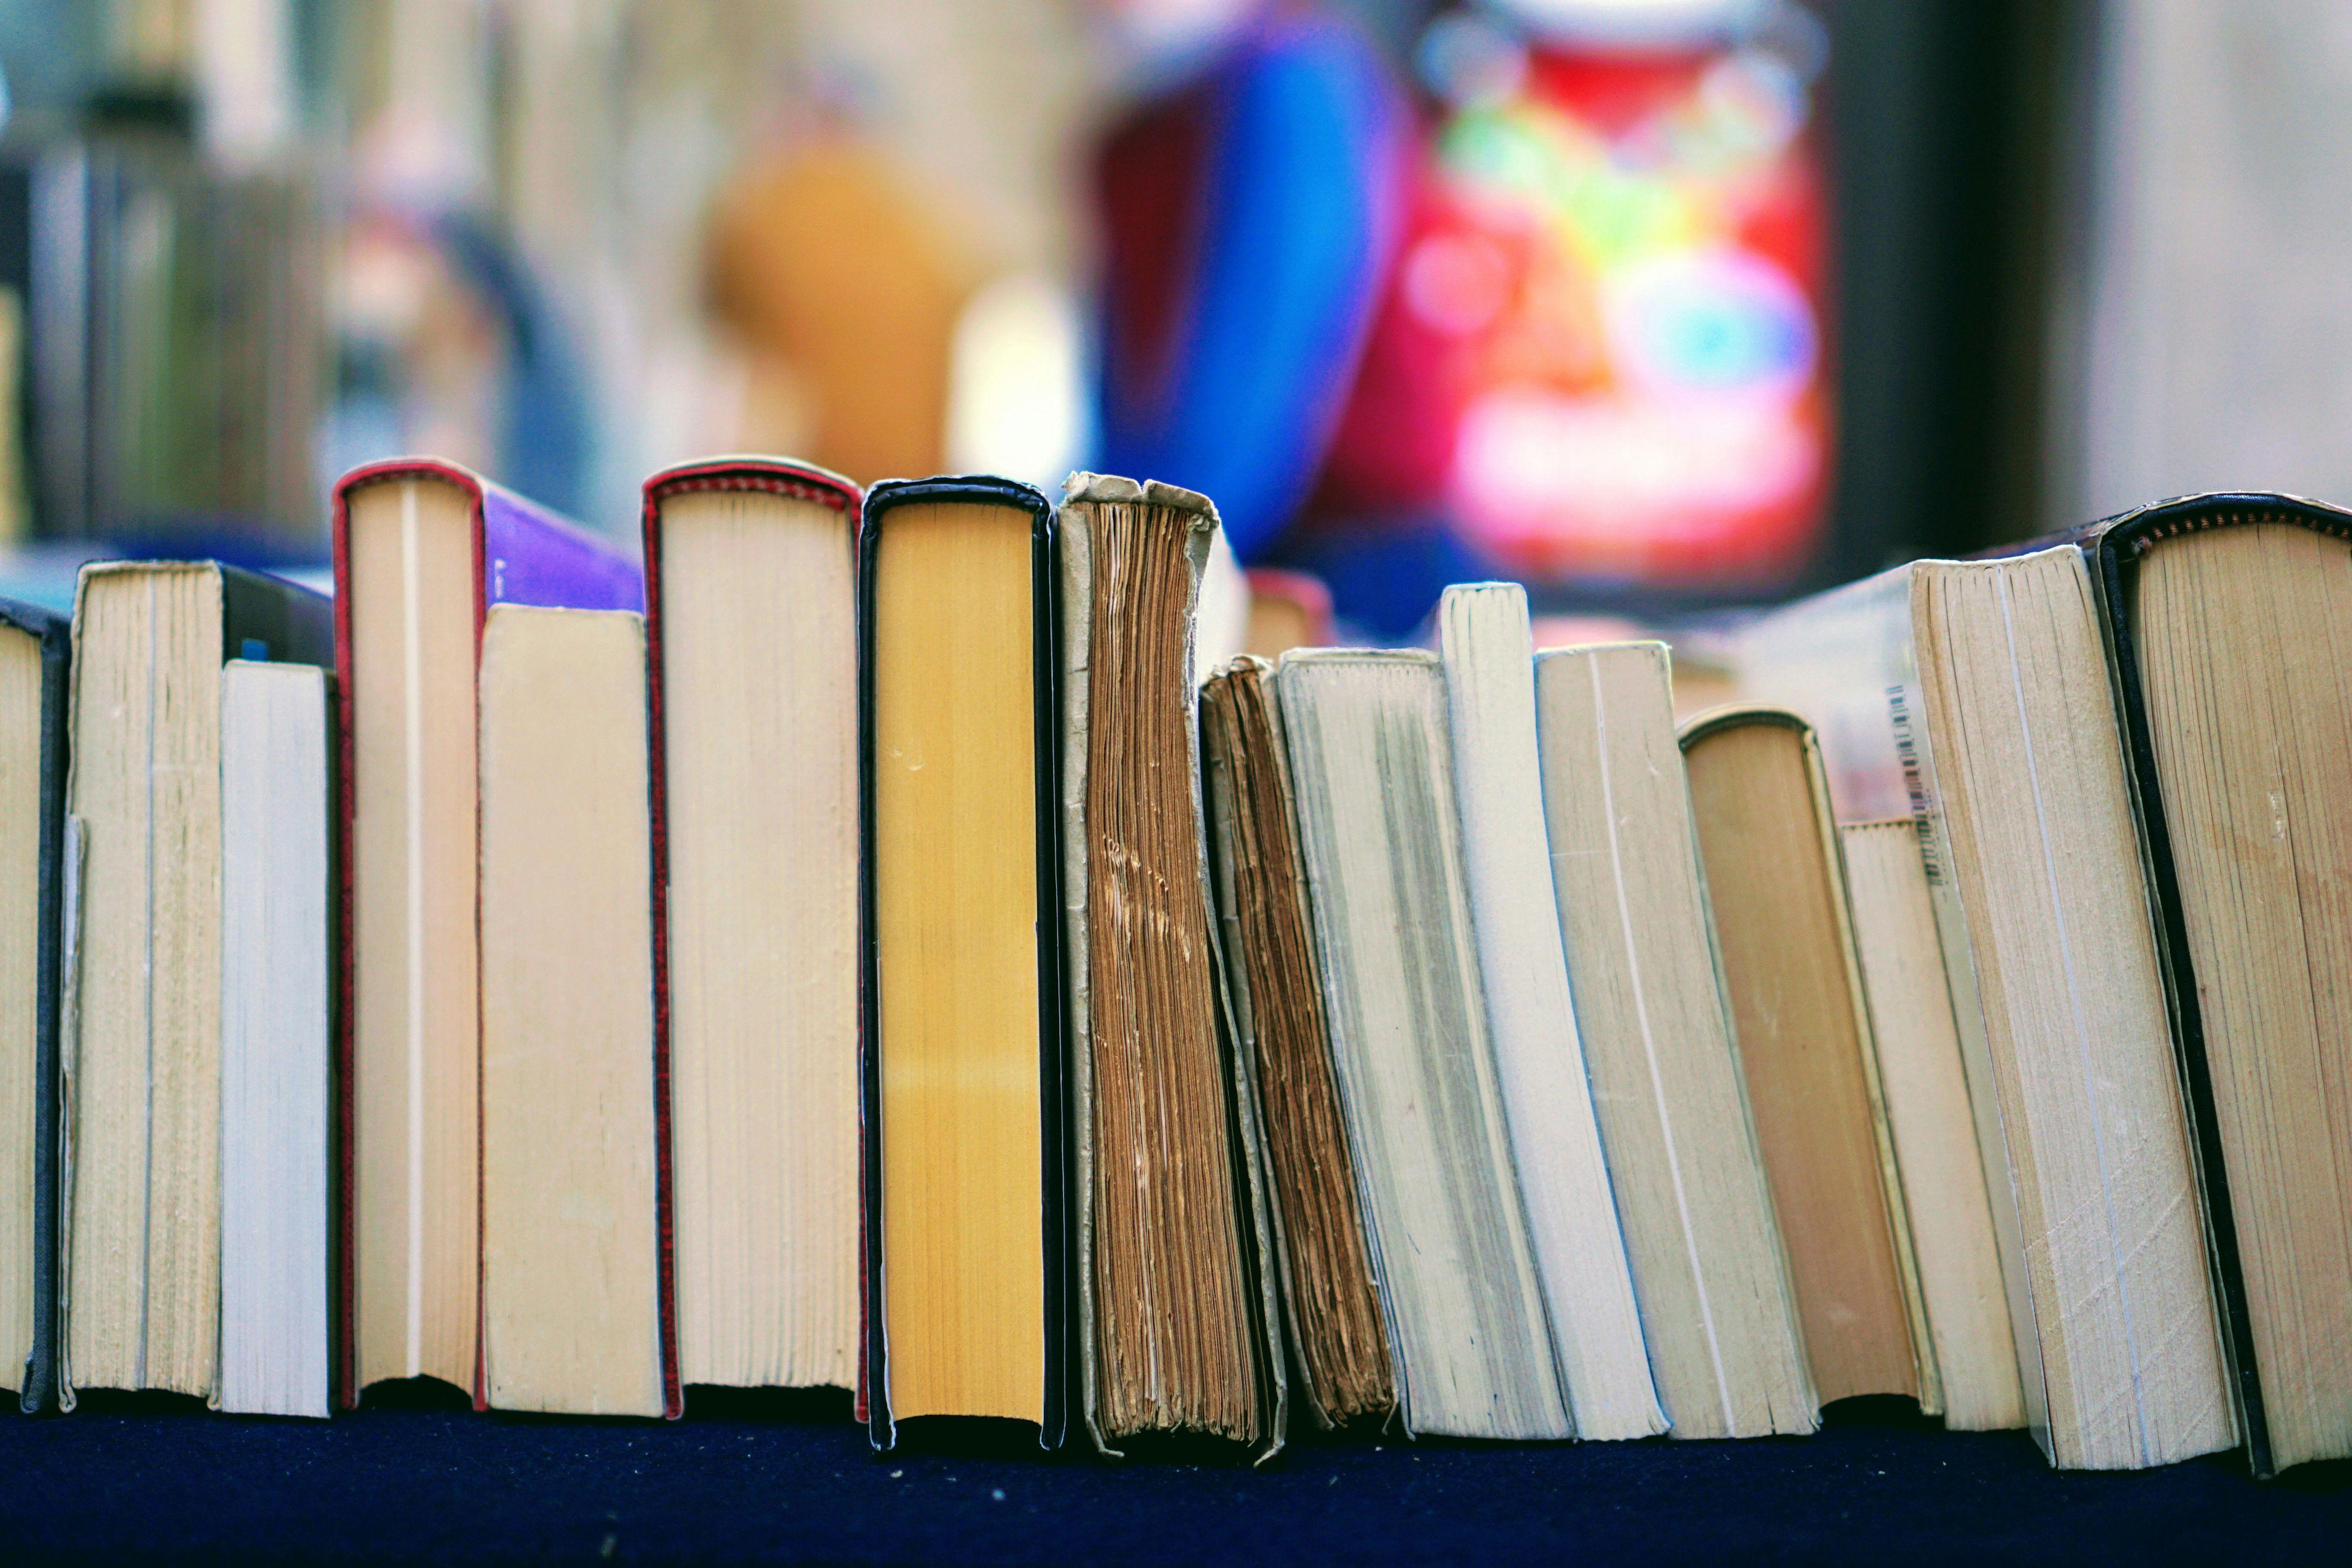 where to buy second-hand books in the uae